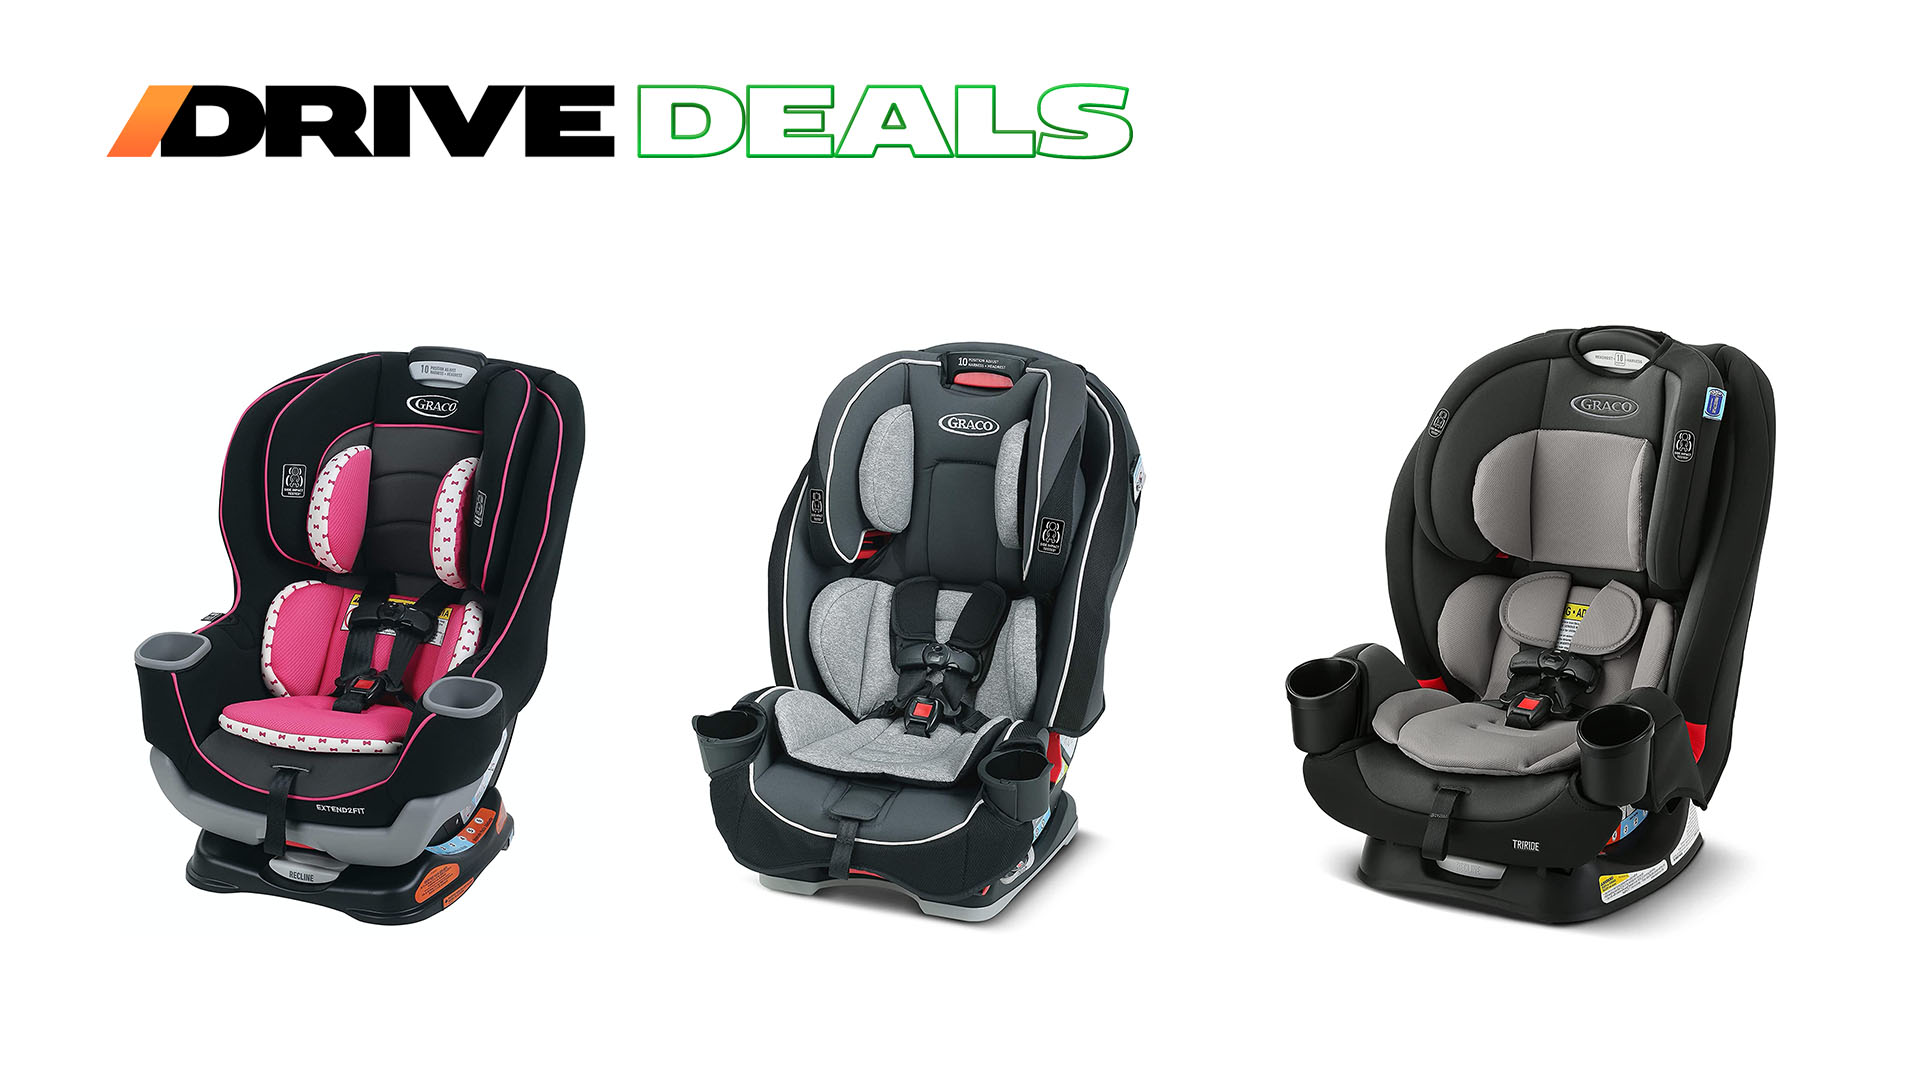 Graco car seats are up to 40% off for October Prime Day 2022